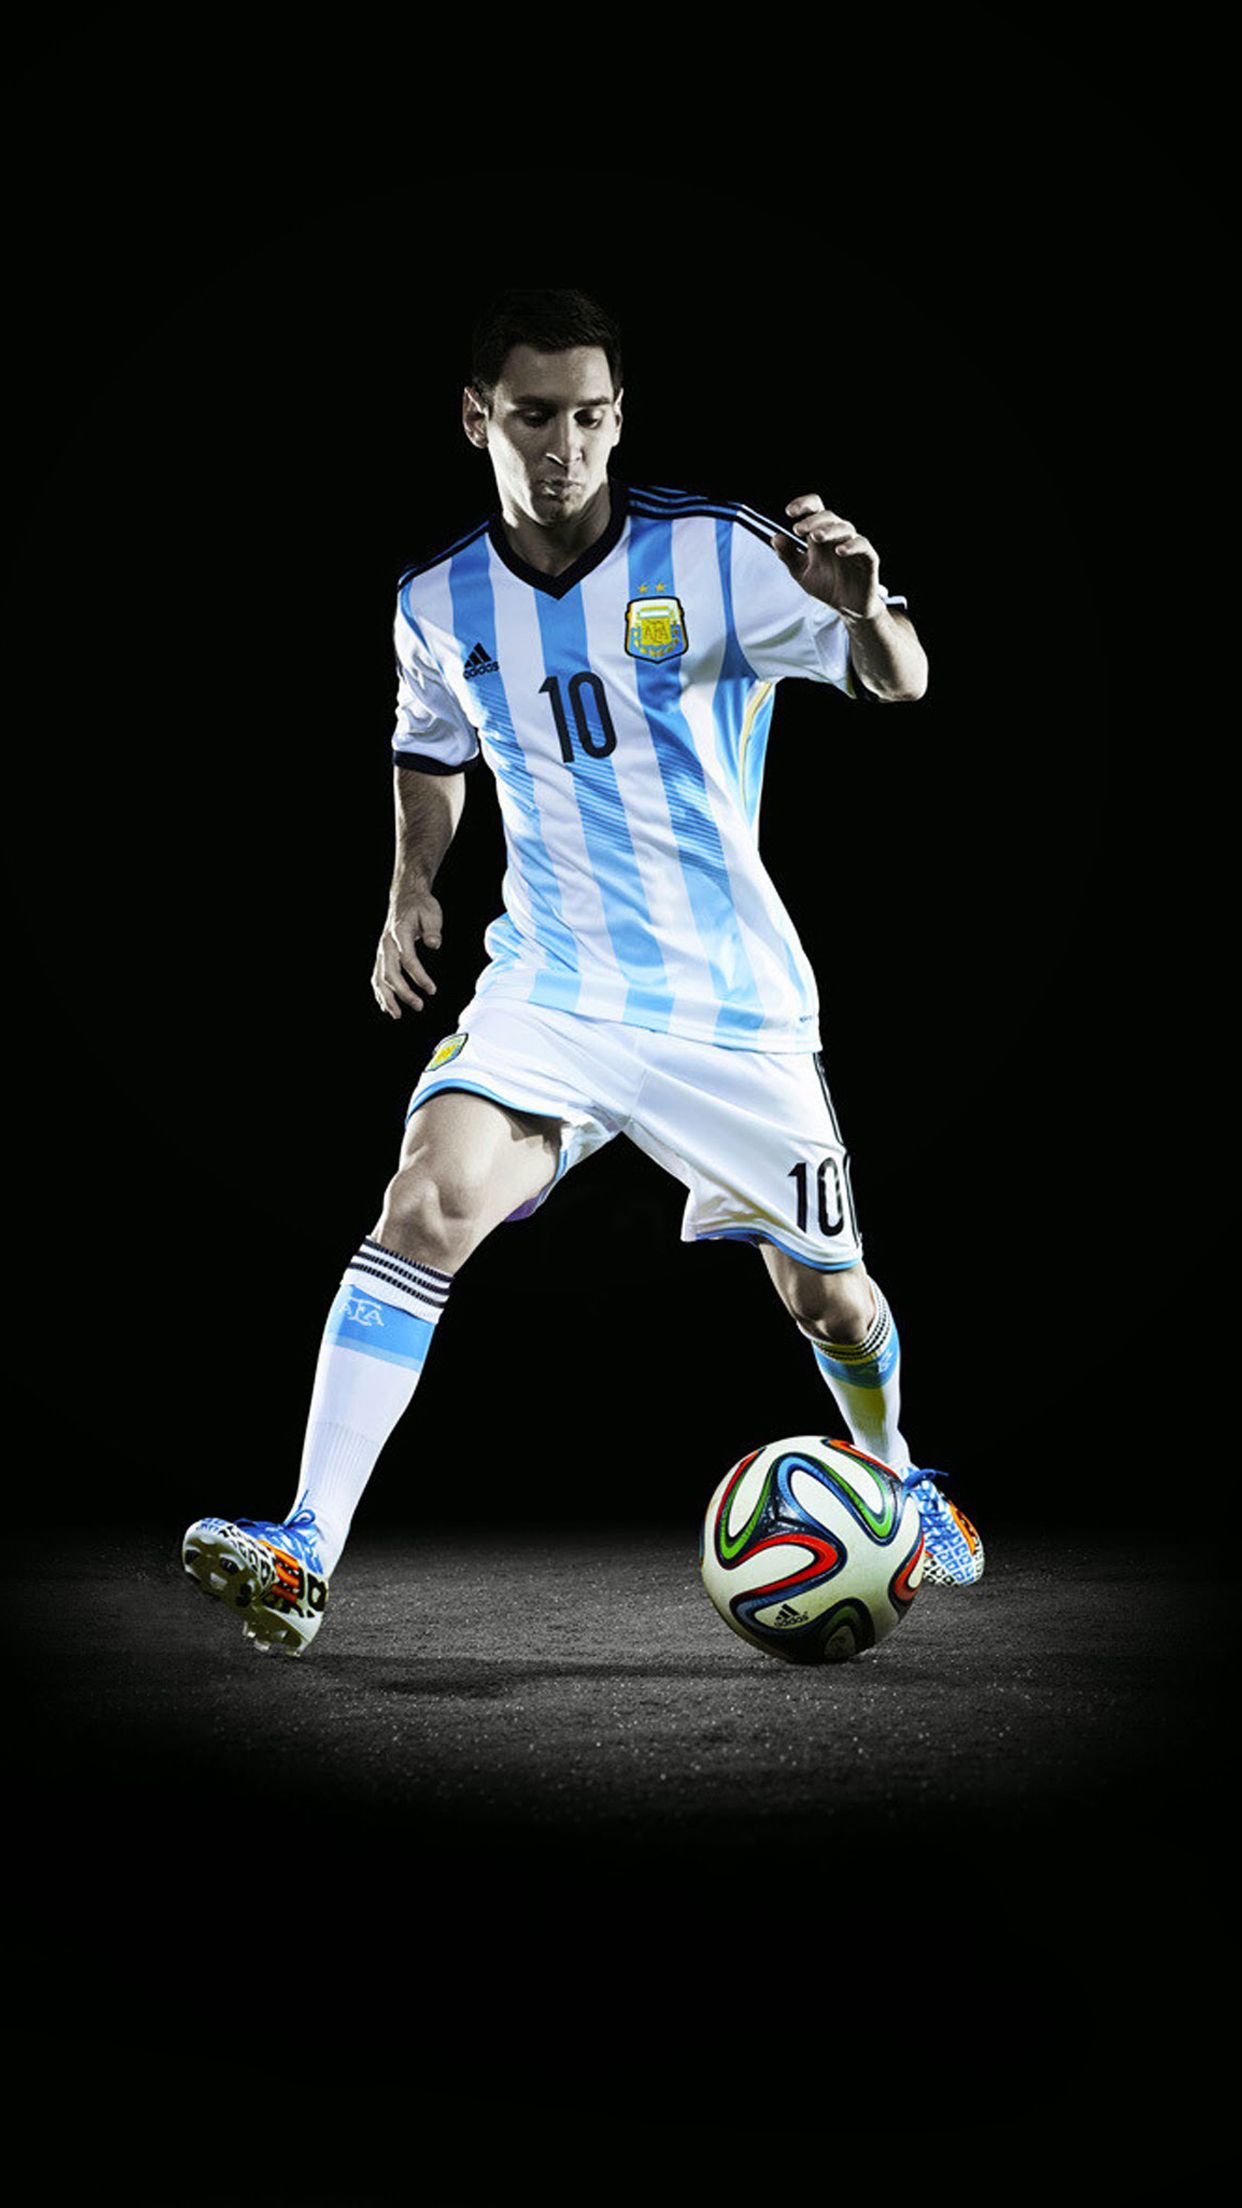 Lionel Messi Wallpaper for iPhone Pro Max, X, 6